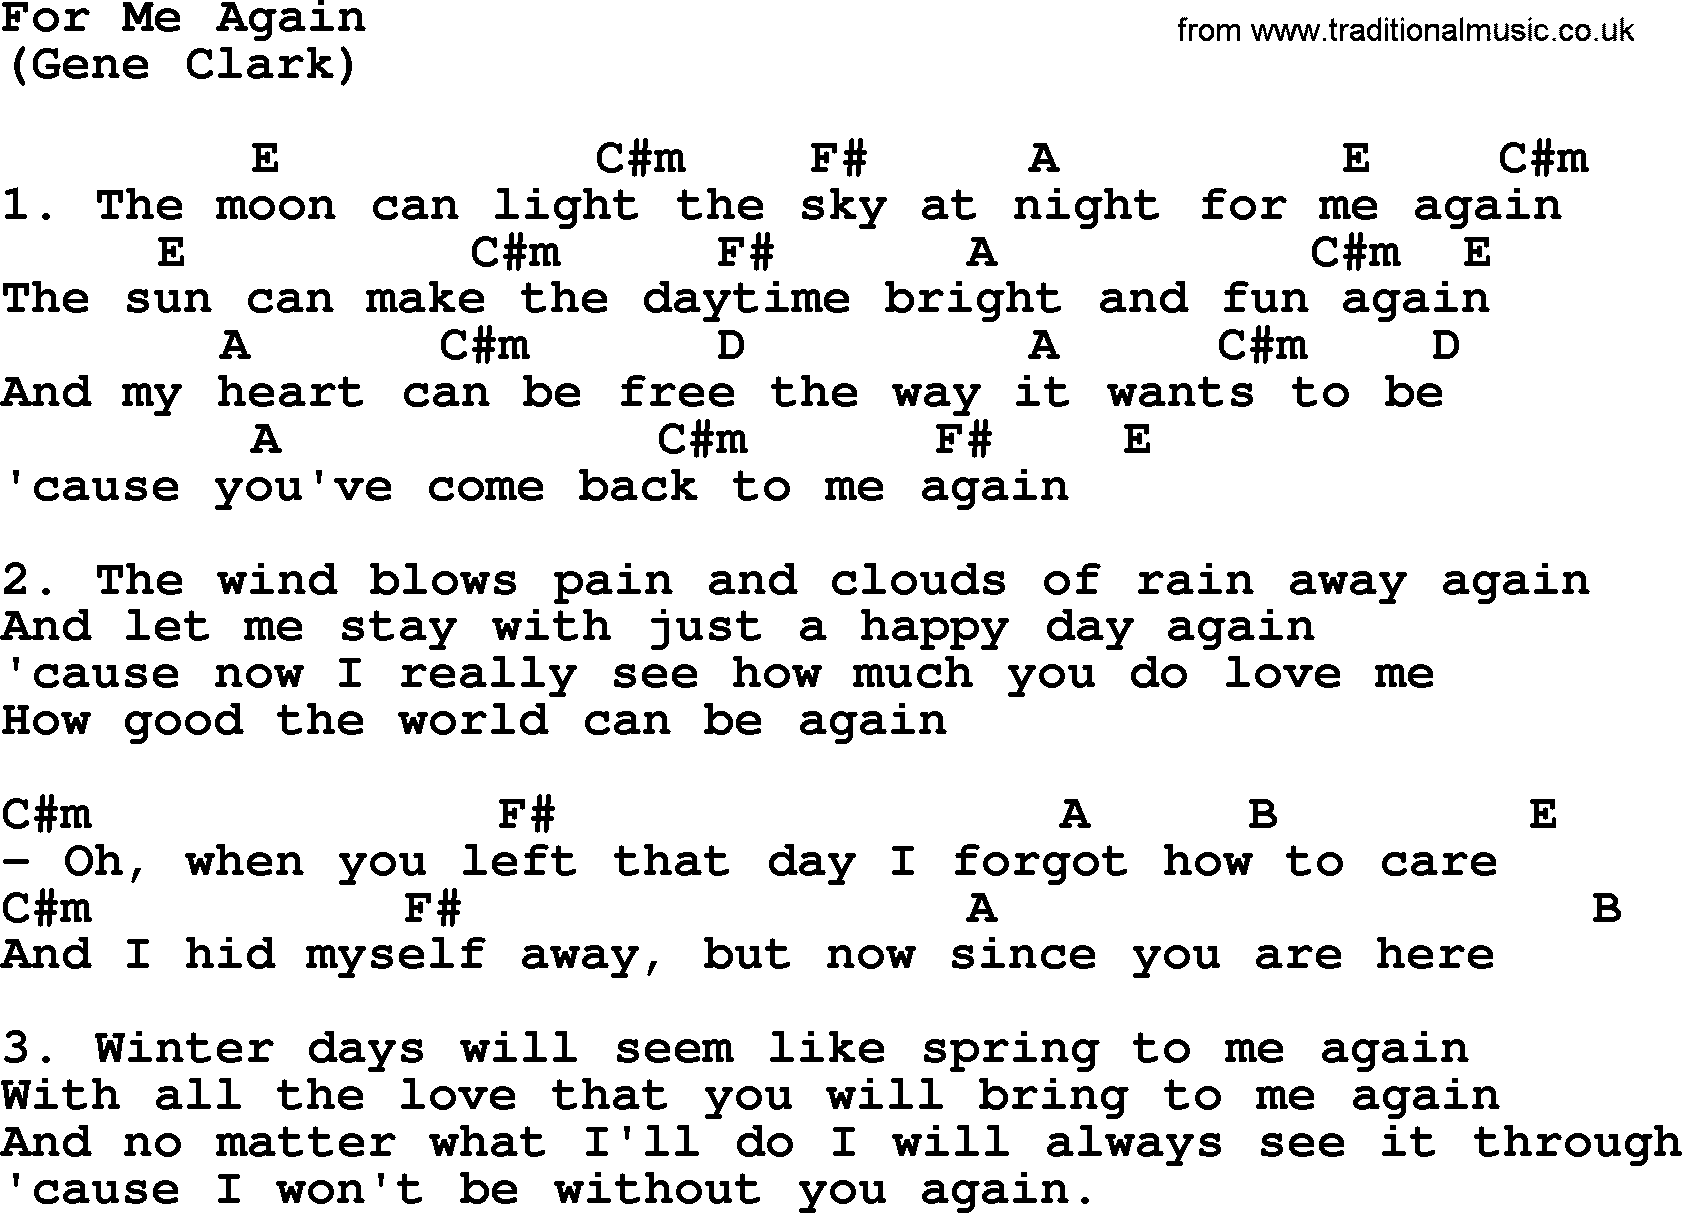 The Byrds song For Me Again, lyrics and chords